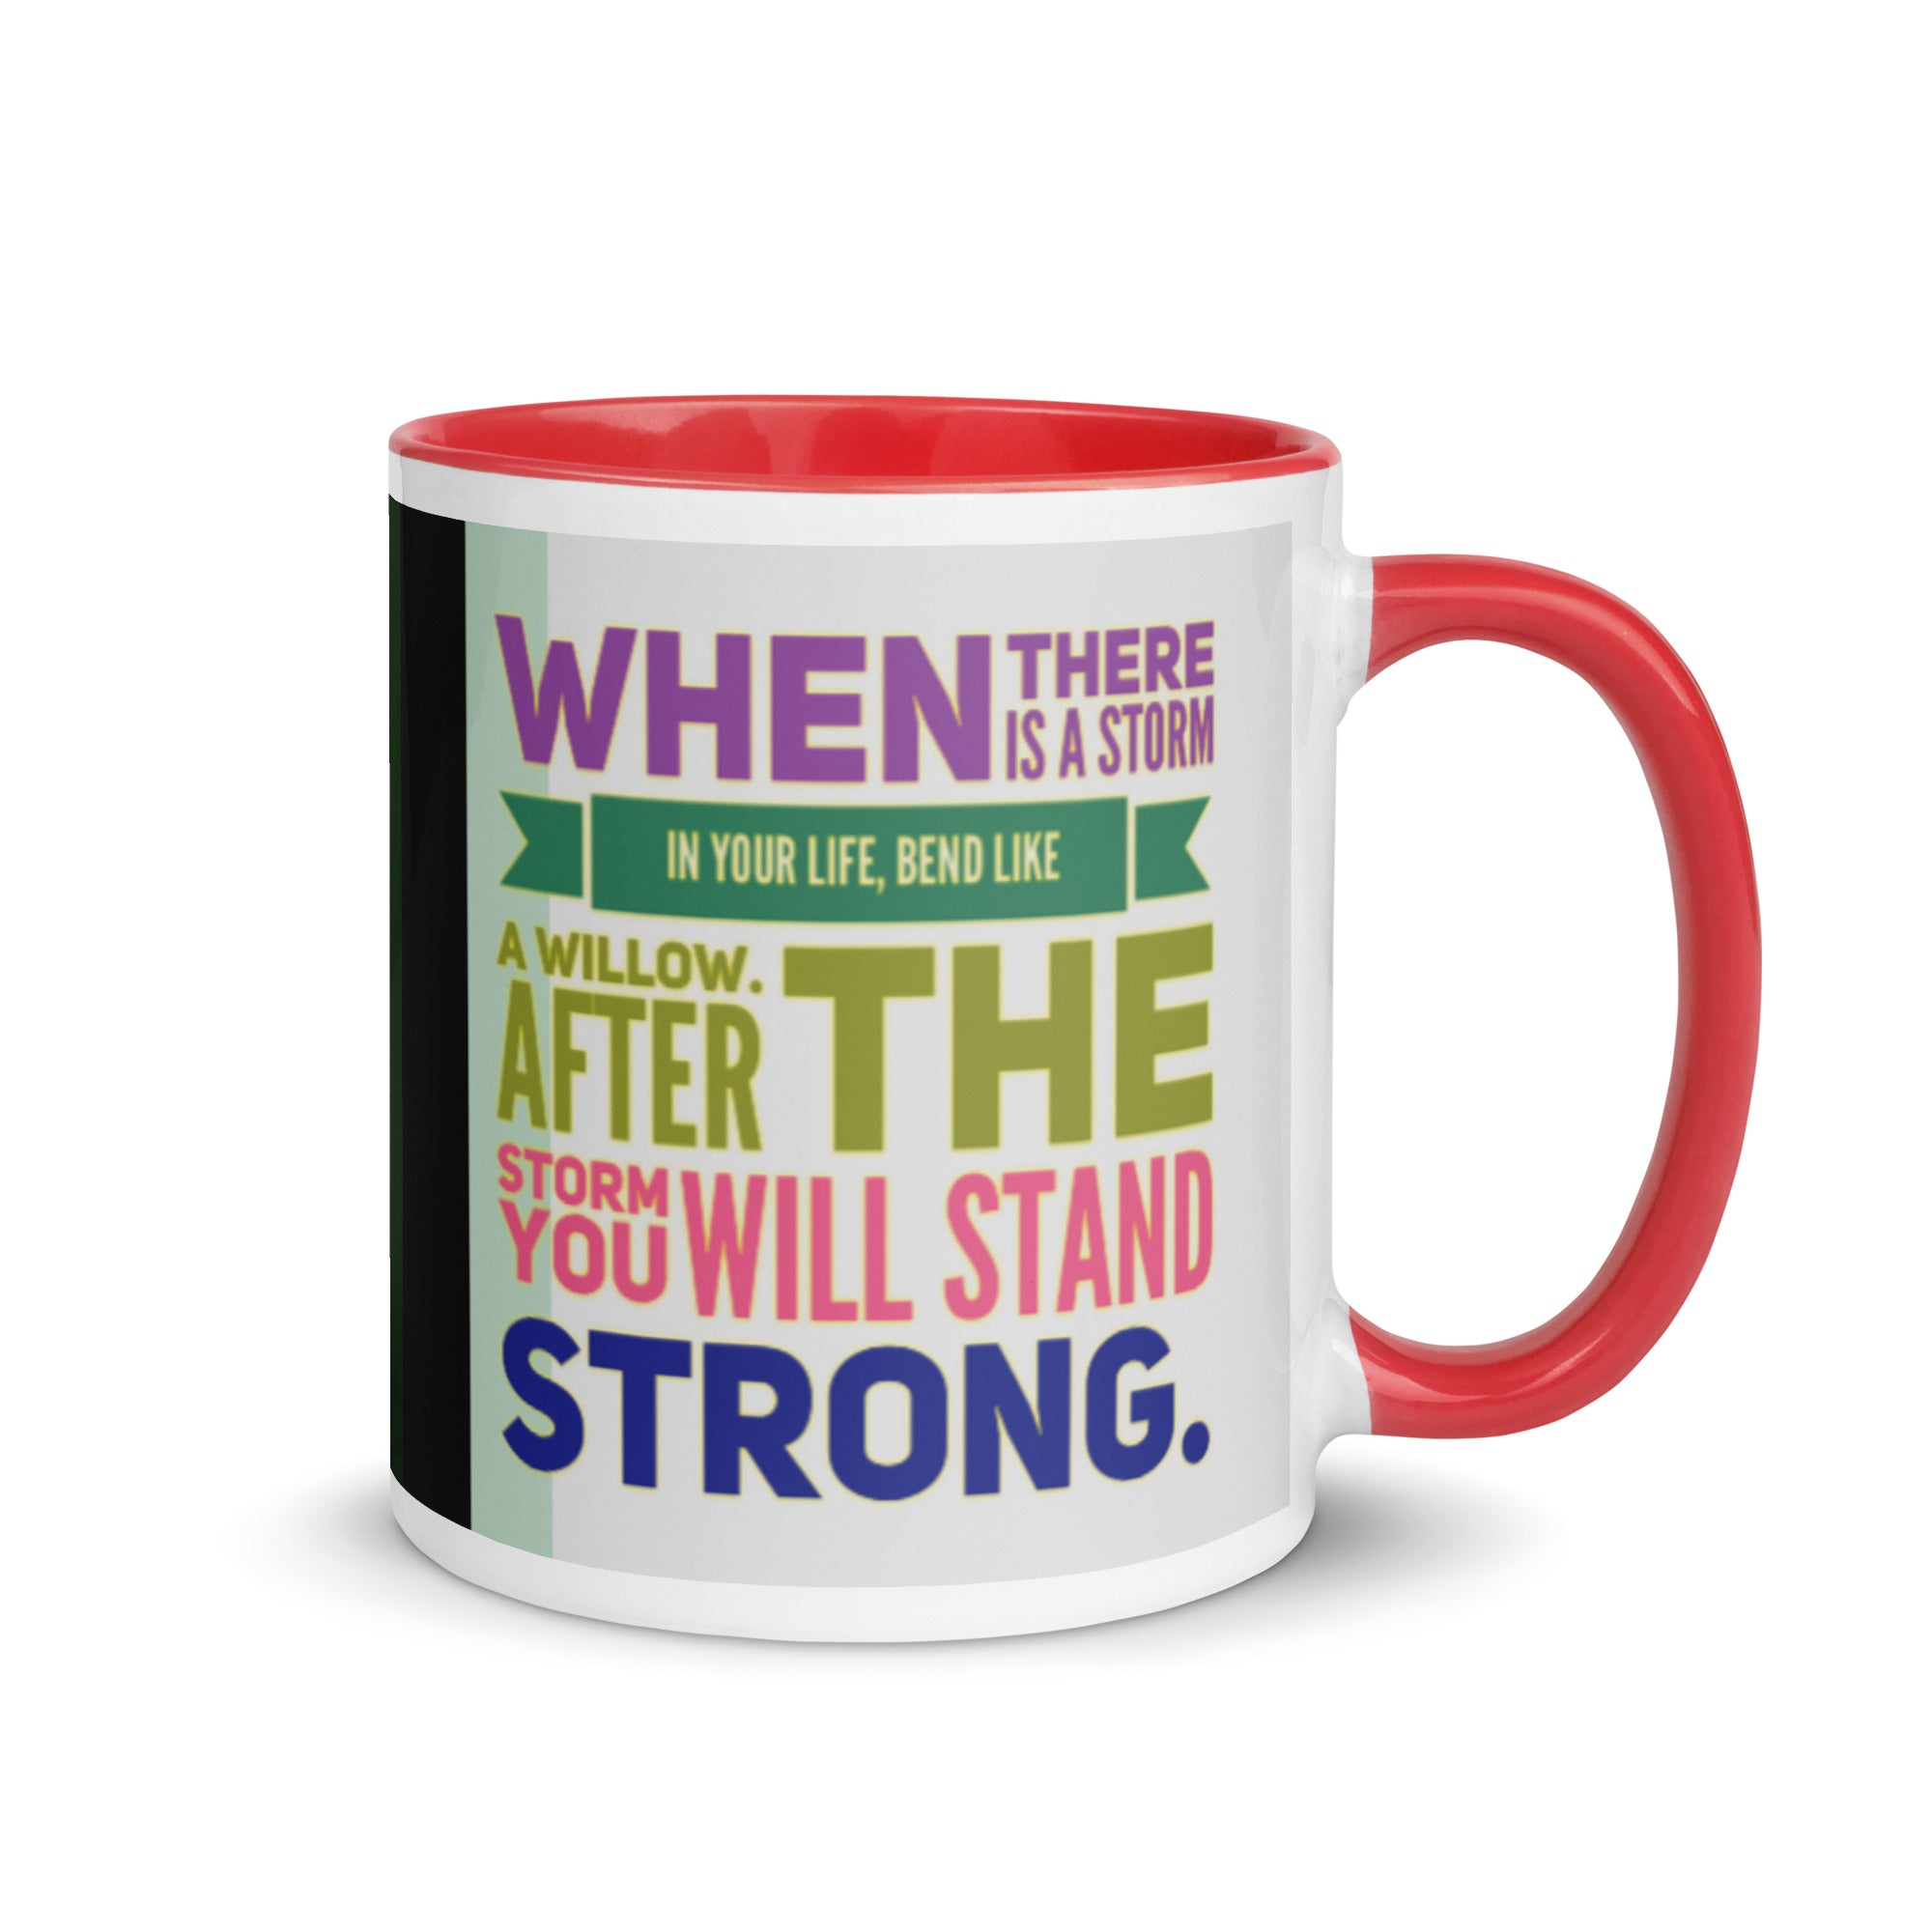 GloWell Designs - Mug with Color Inside - Motivational Quote - Bend Like a Willow - GloWell Designs